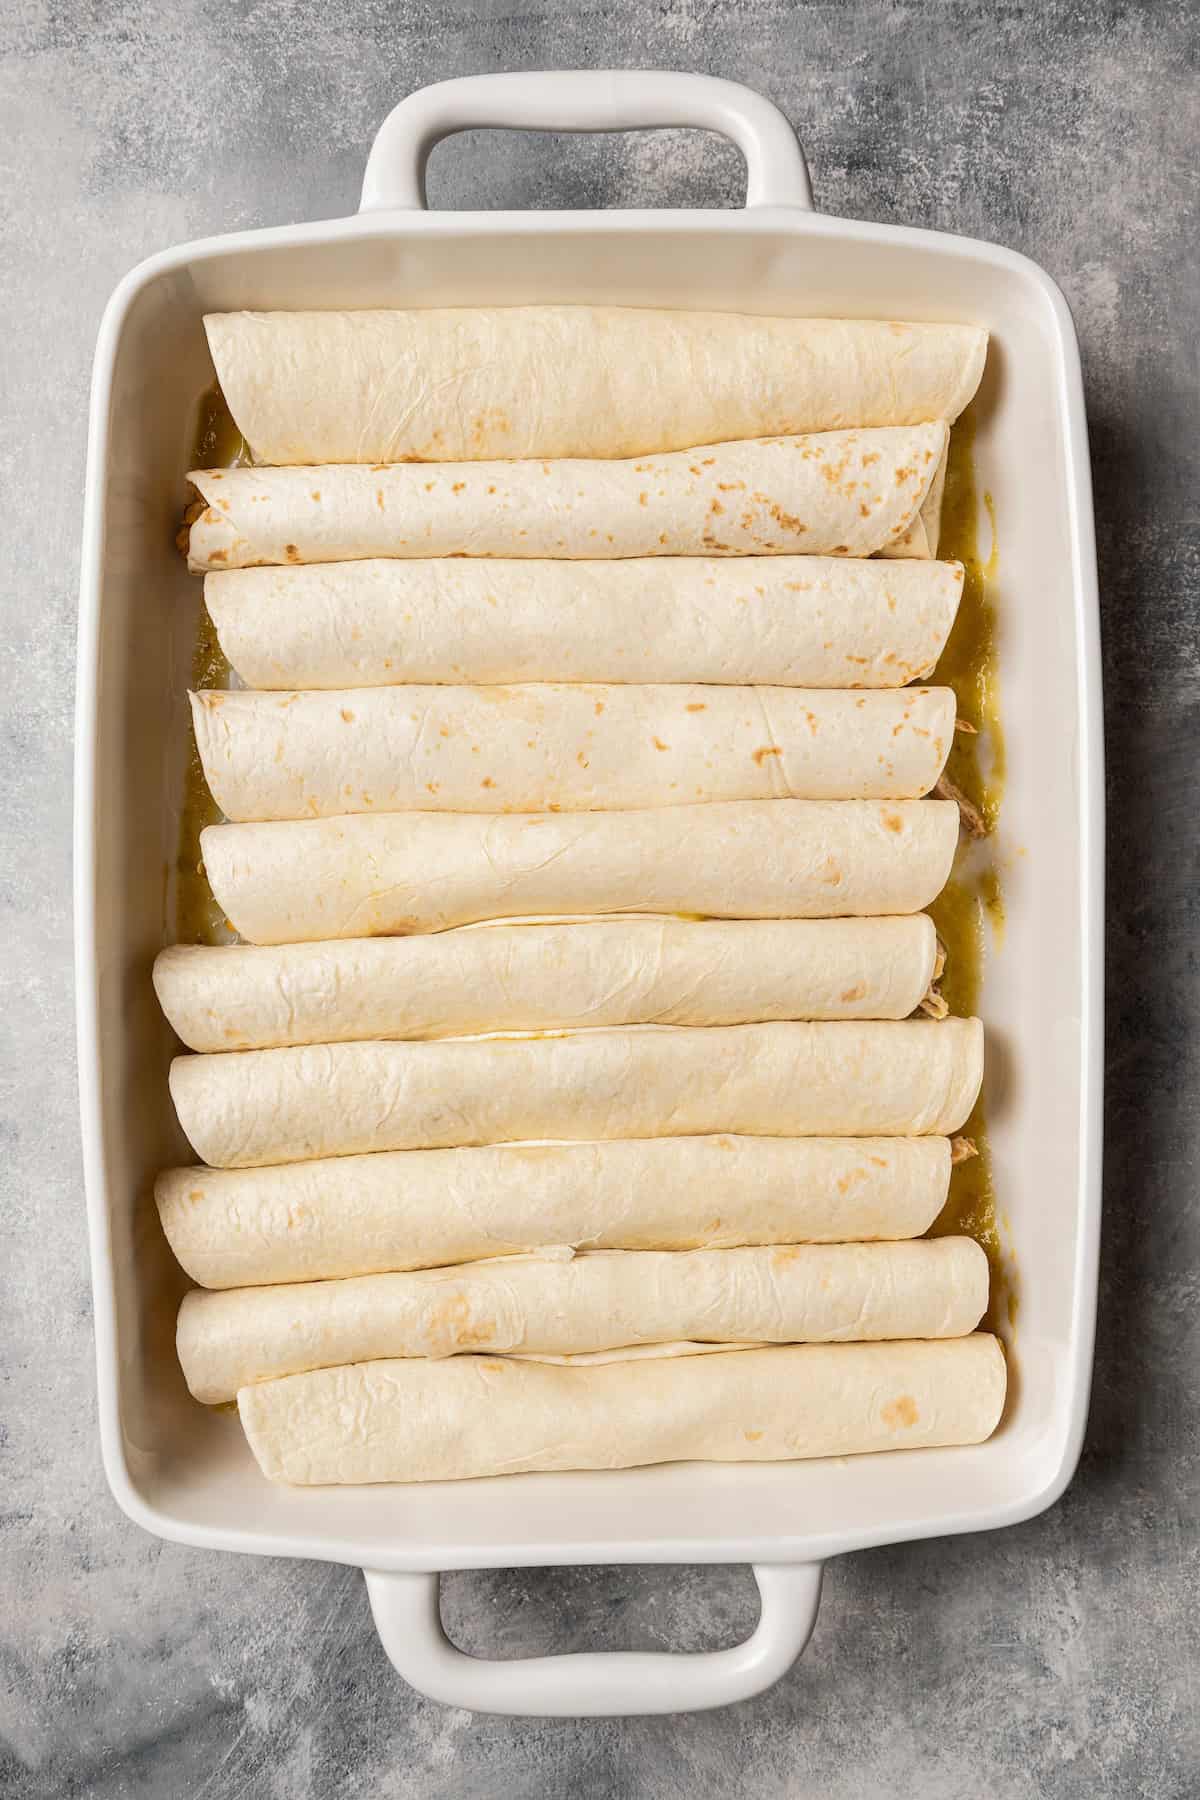 Filled and rolled flour tortillas lined up inside a baking dish.